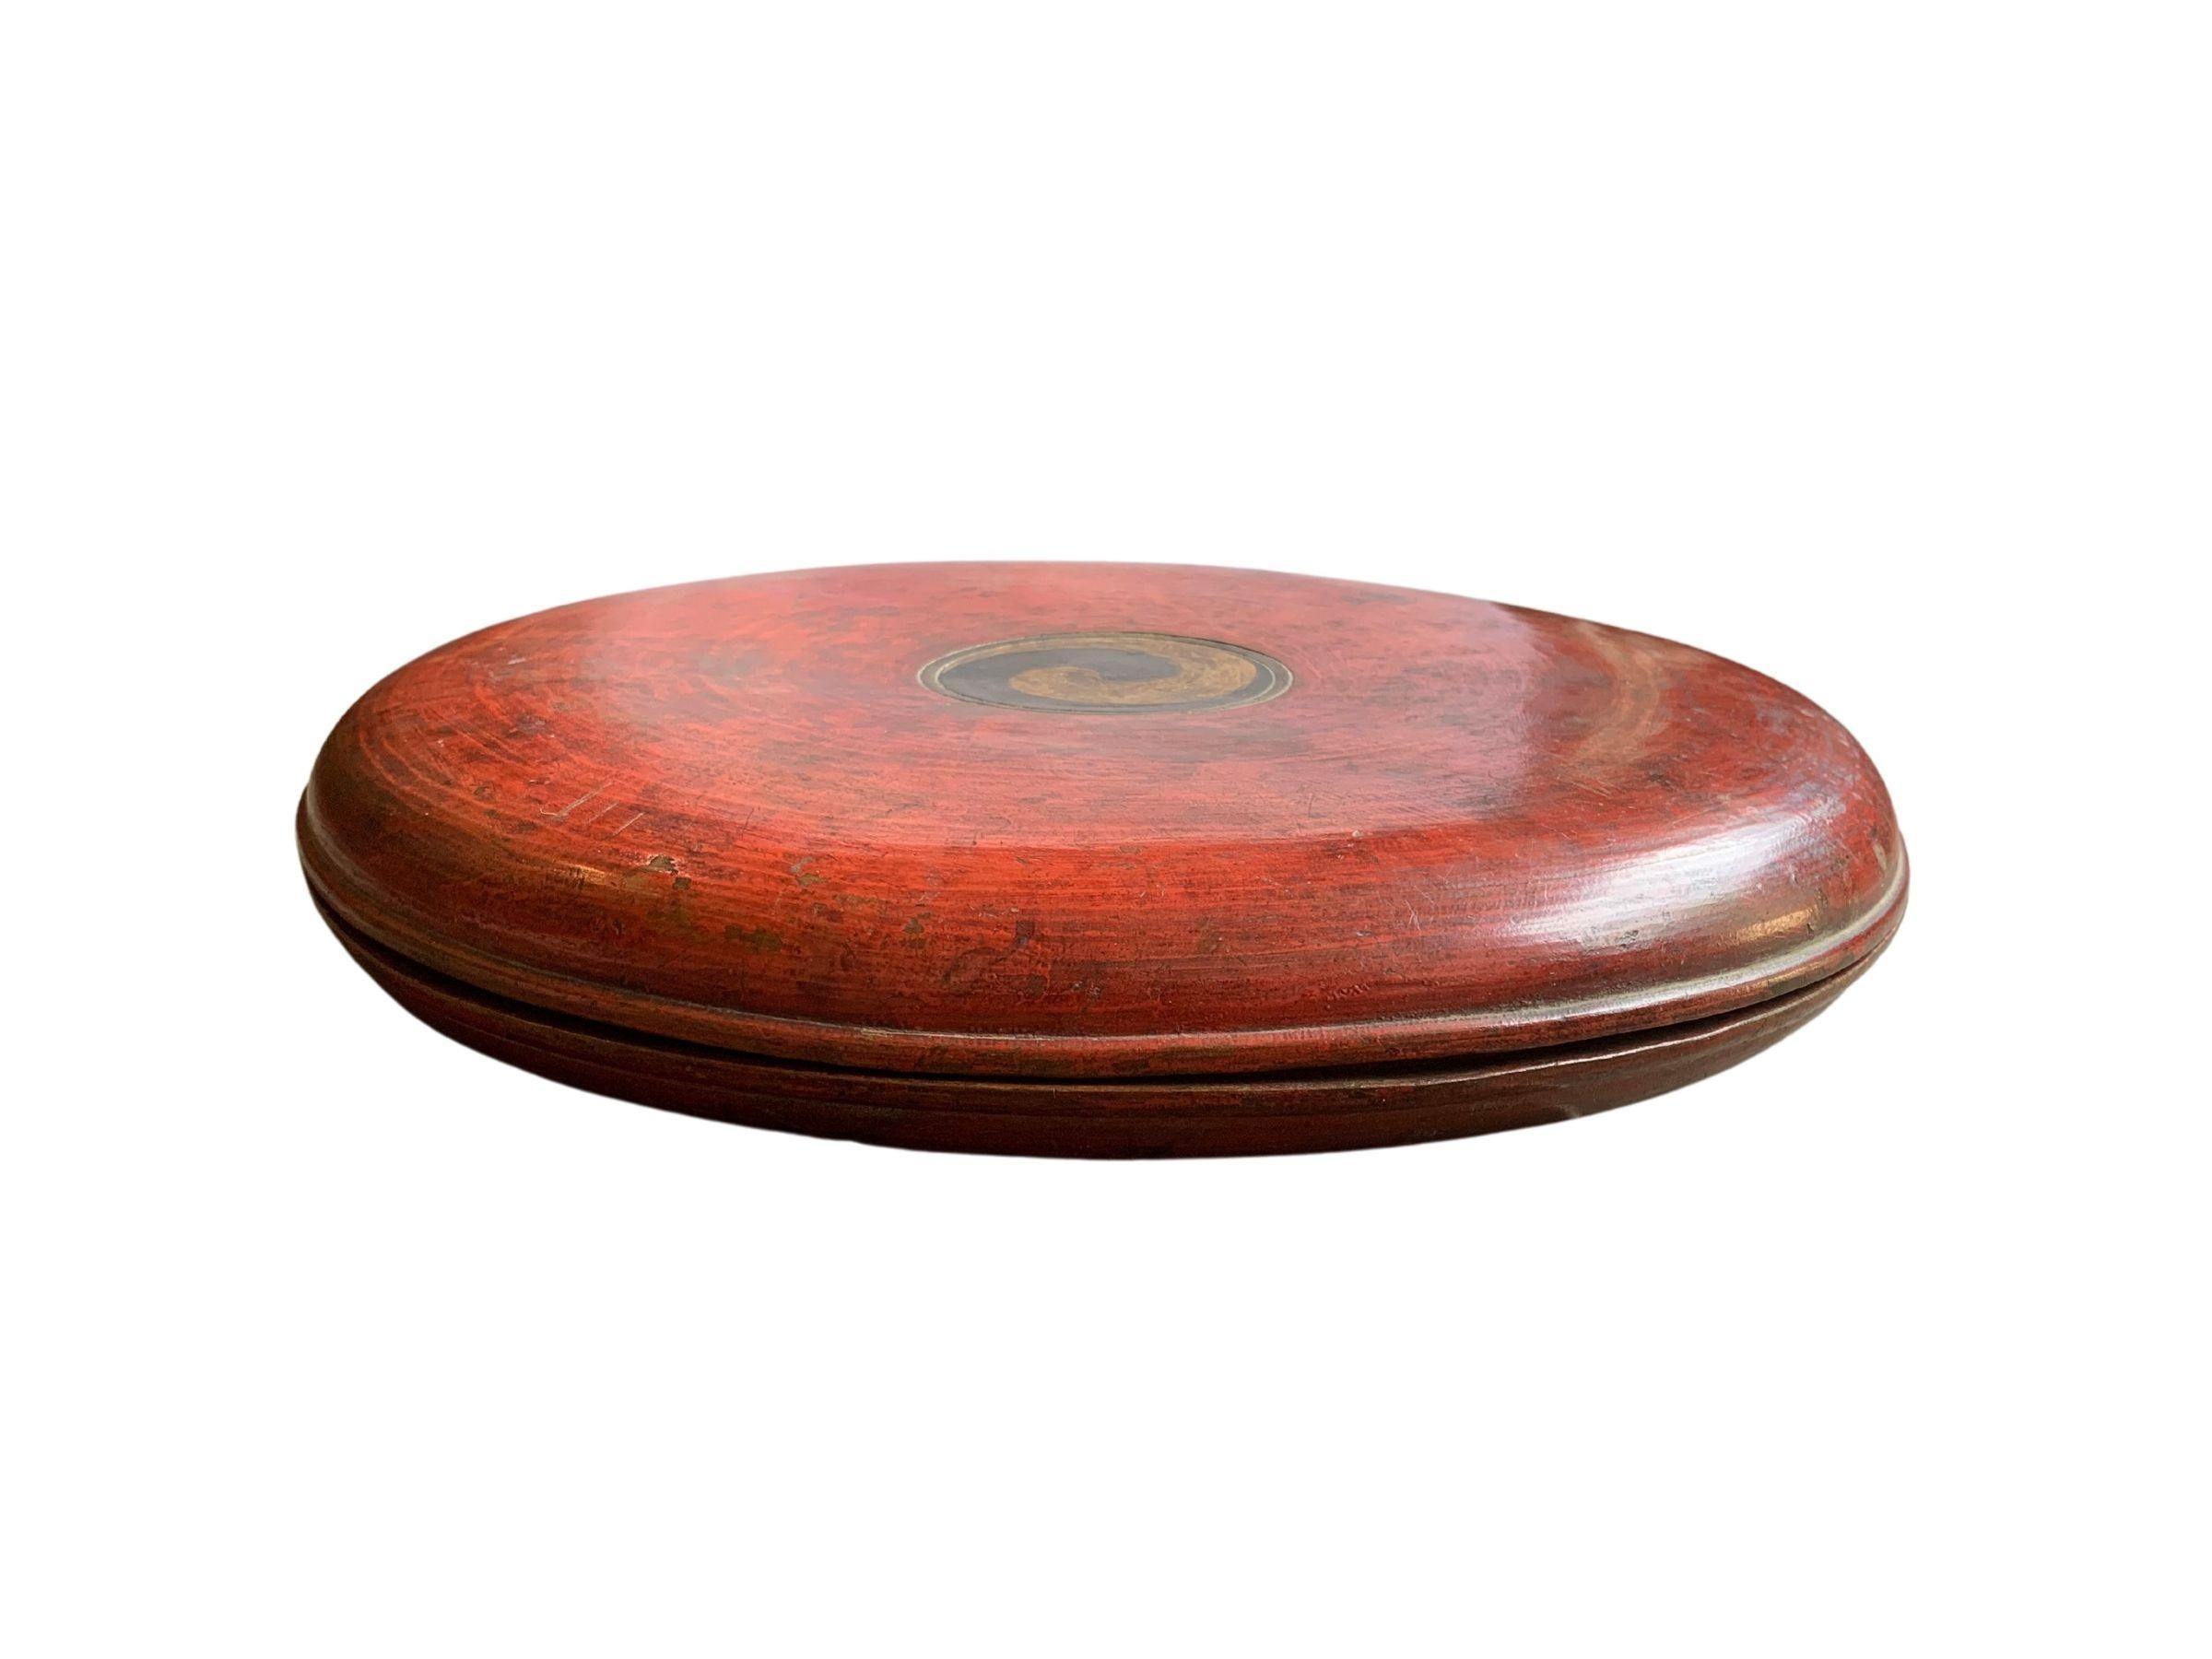 A visibly old red lacquered round wooden box from Qing Dynasty China. The fading of the original lacquer and paintwork over the many years adds to this boxes charm. Once used to serve food (sweets and other deserts) when welcoming people to ones